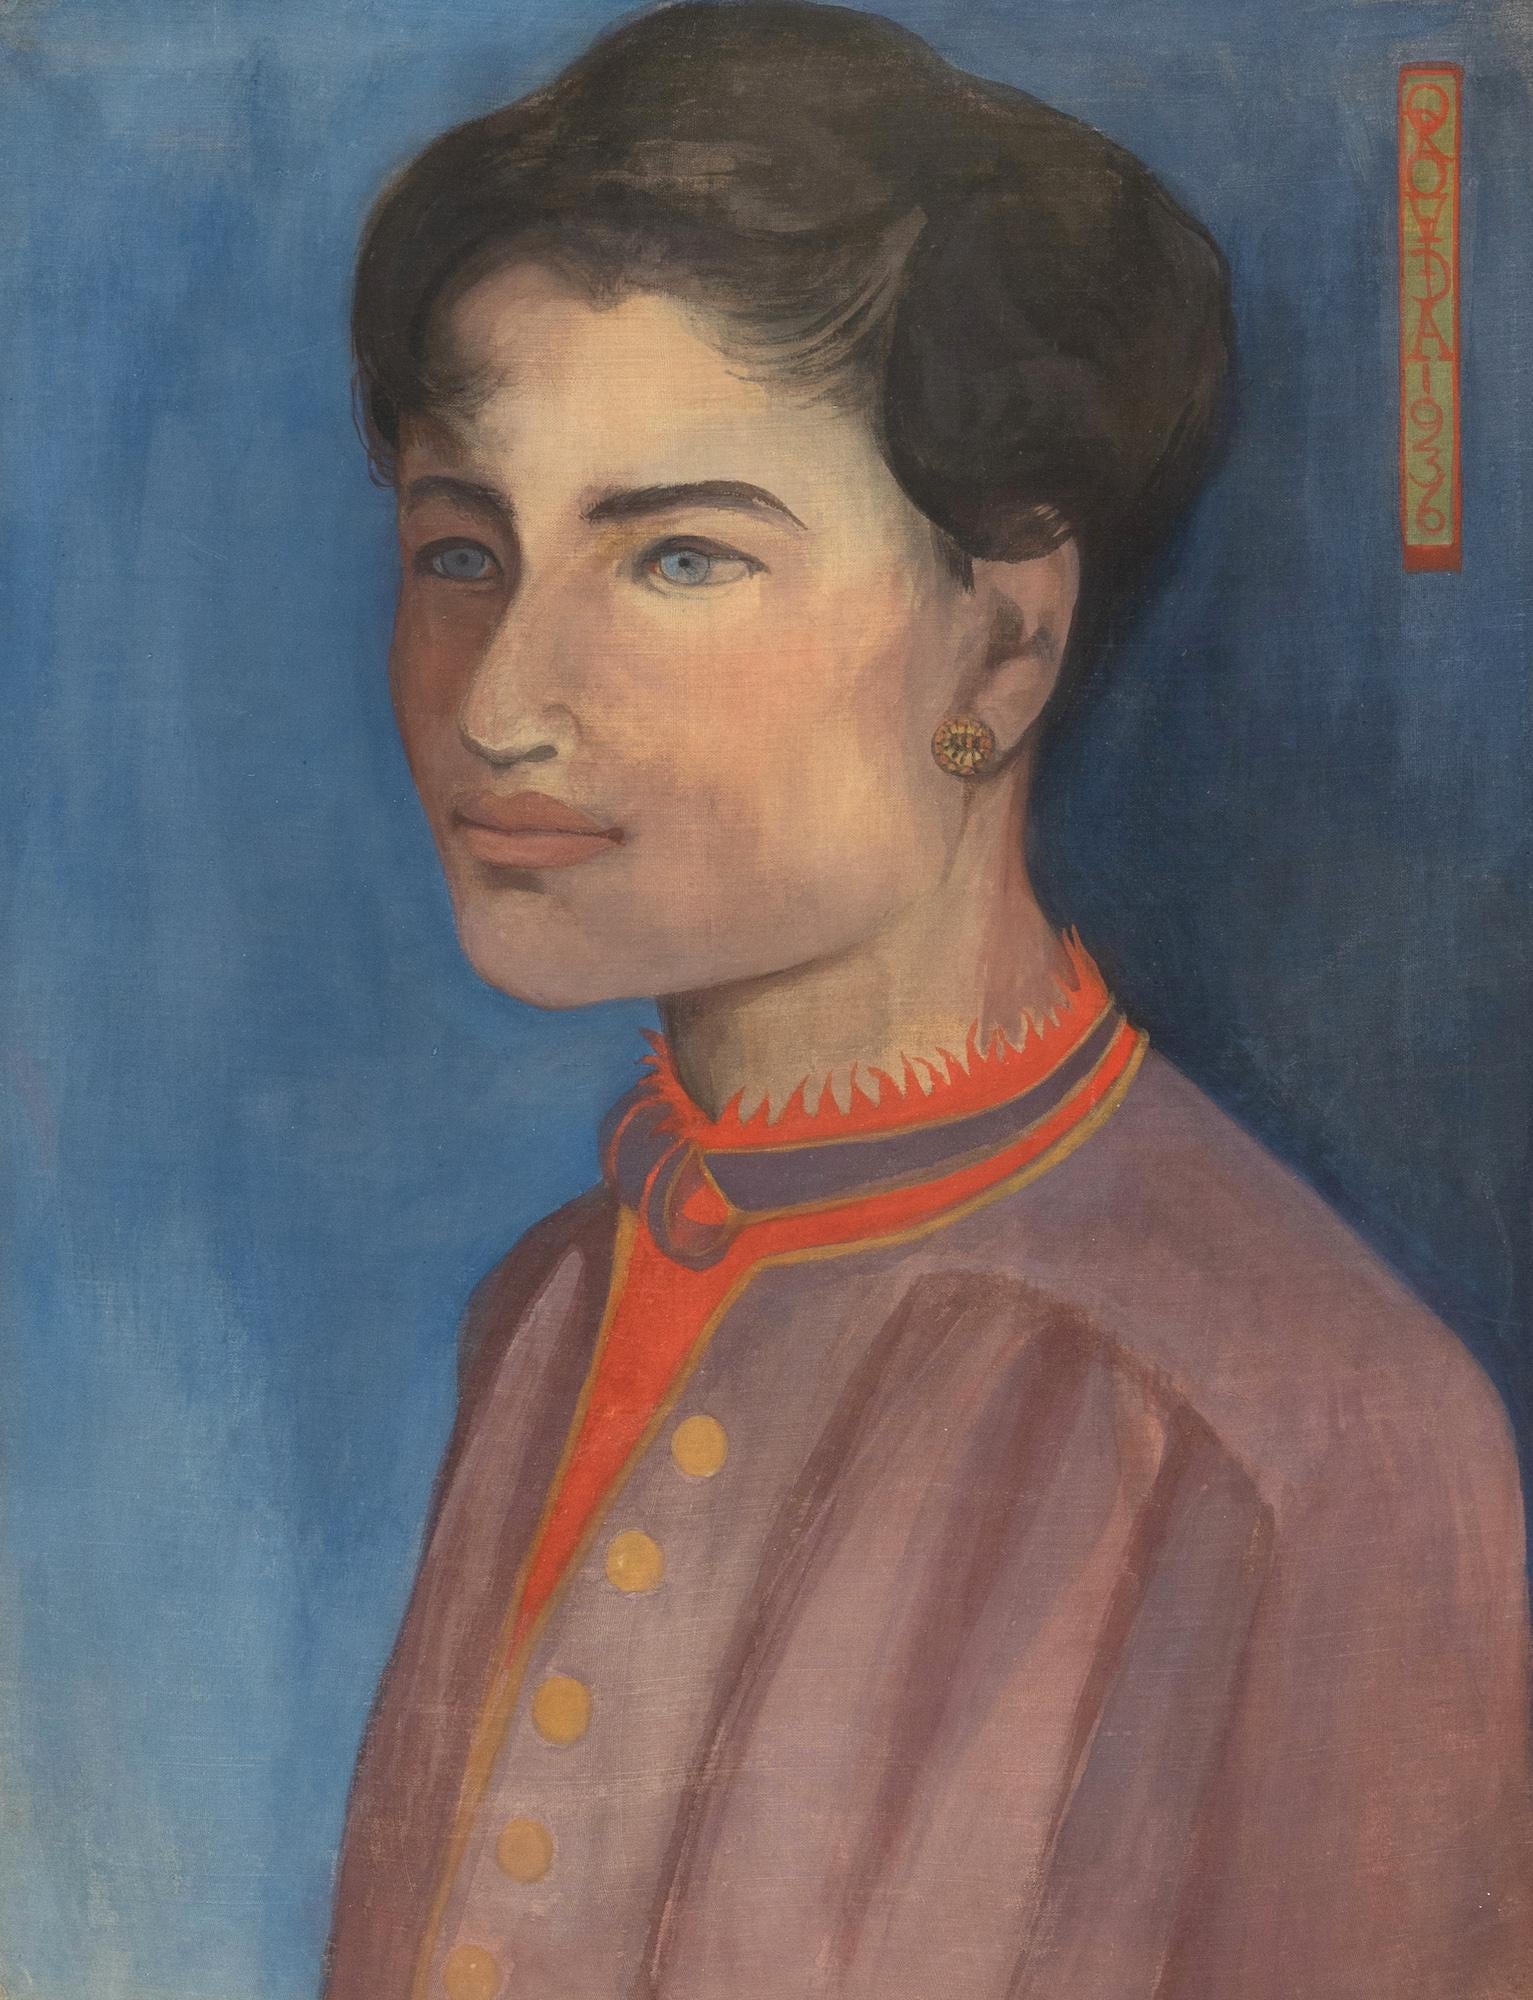 Portrait of a Woman by Orovida Pissarro (1893-1968)
Egg tempera on silk laid down on stretched linen
47.6 x 37 cm (18 ³/₄ x 14 ⁵/₈ inches)
Signed and dated upper right, OROVIDA 1936

Provenance: Christie's London, 1985
Kunstgalerij De Vuyst,